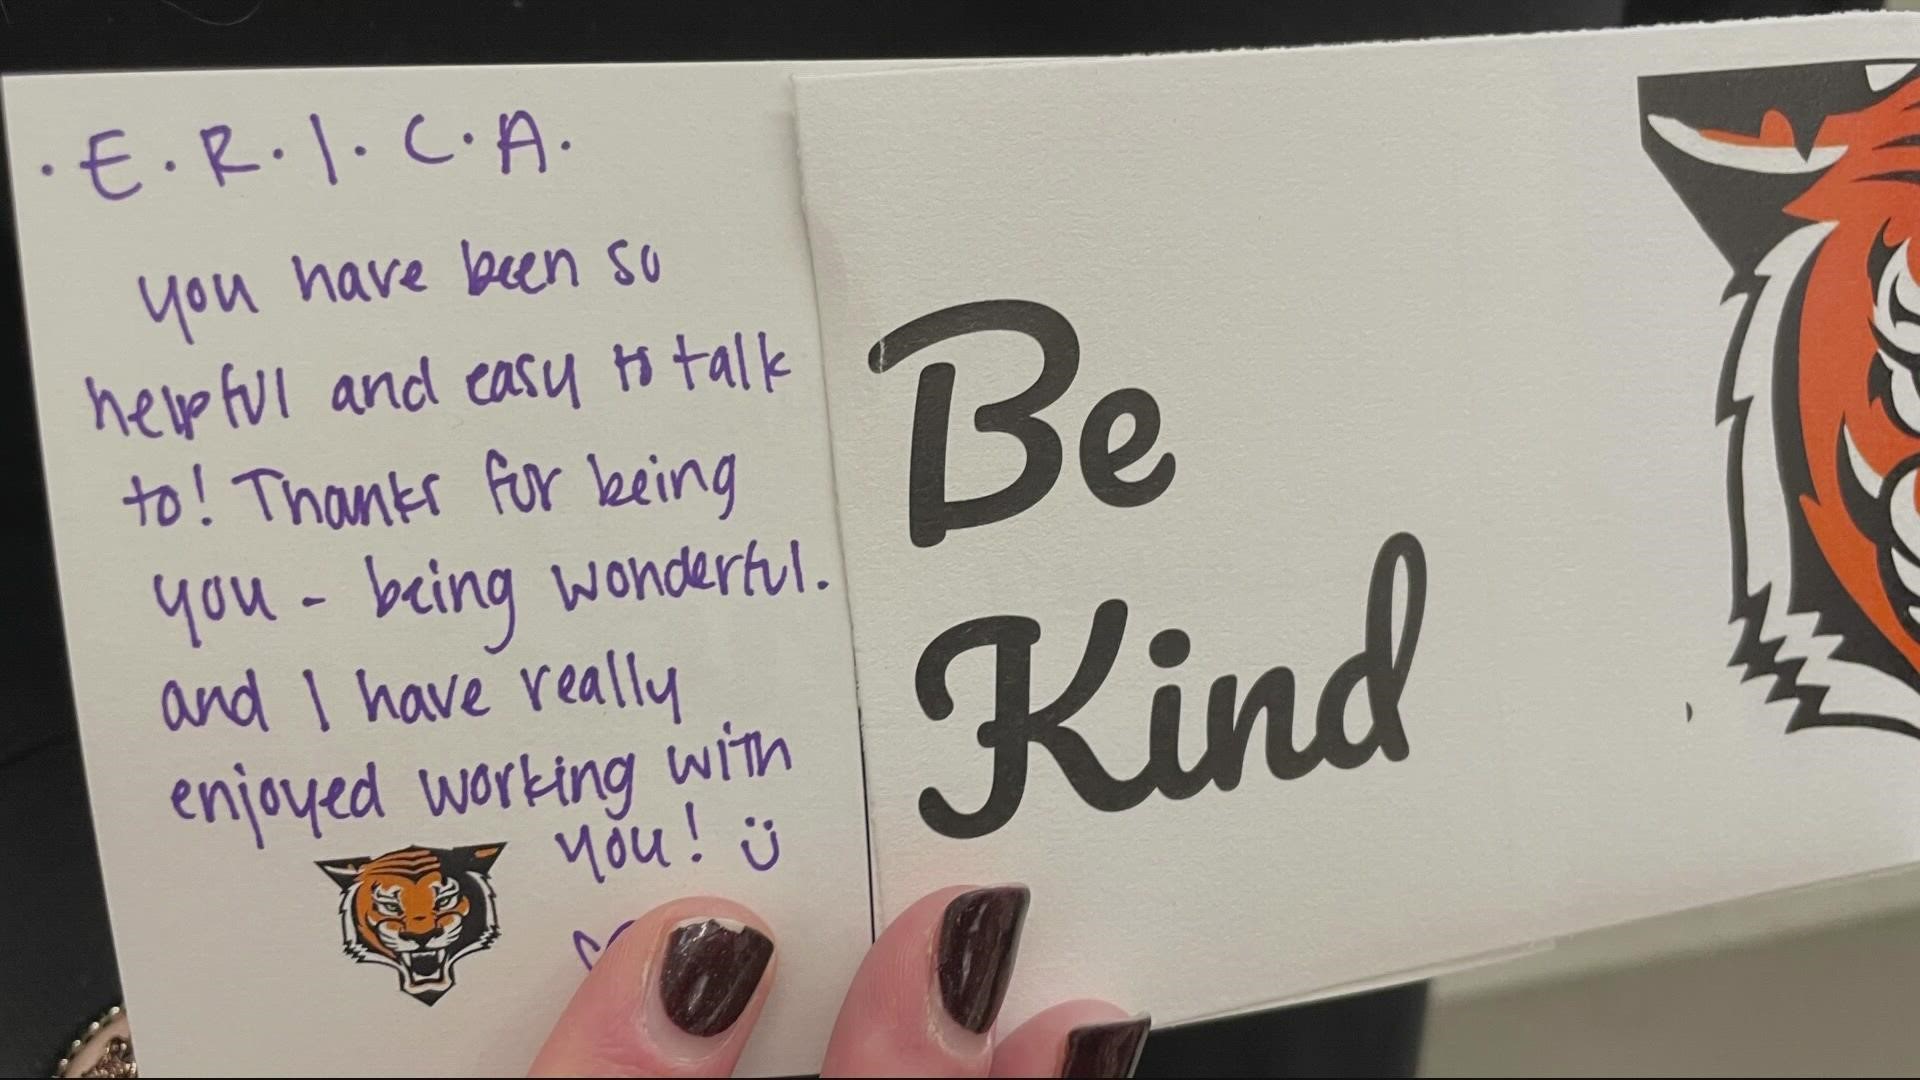 A group called ‘No Place for Hate’ is encouraging fellow students to write positive messages on cards to be delivered to other students in class.